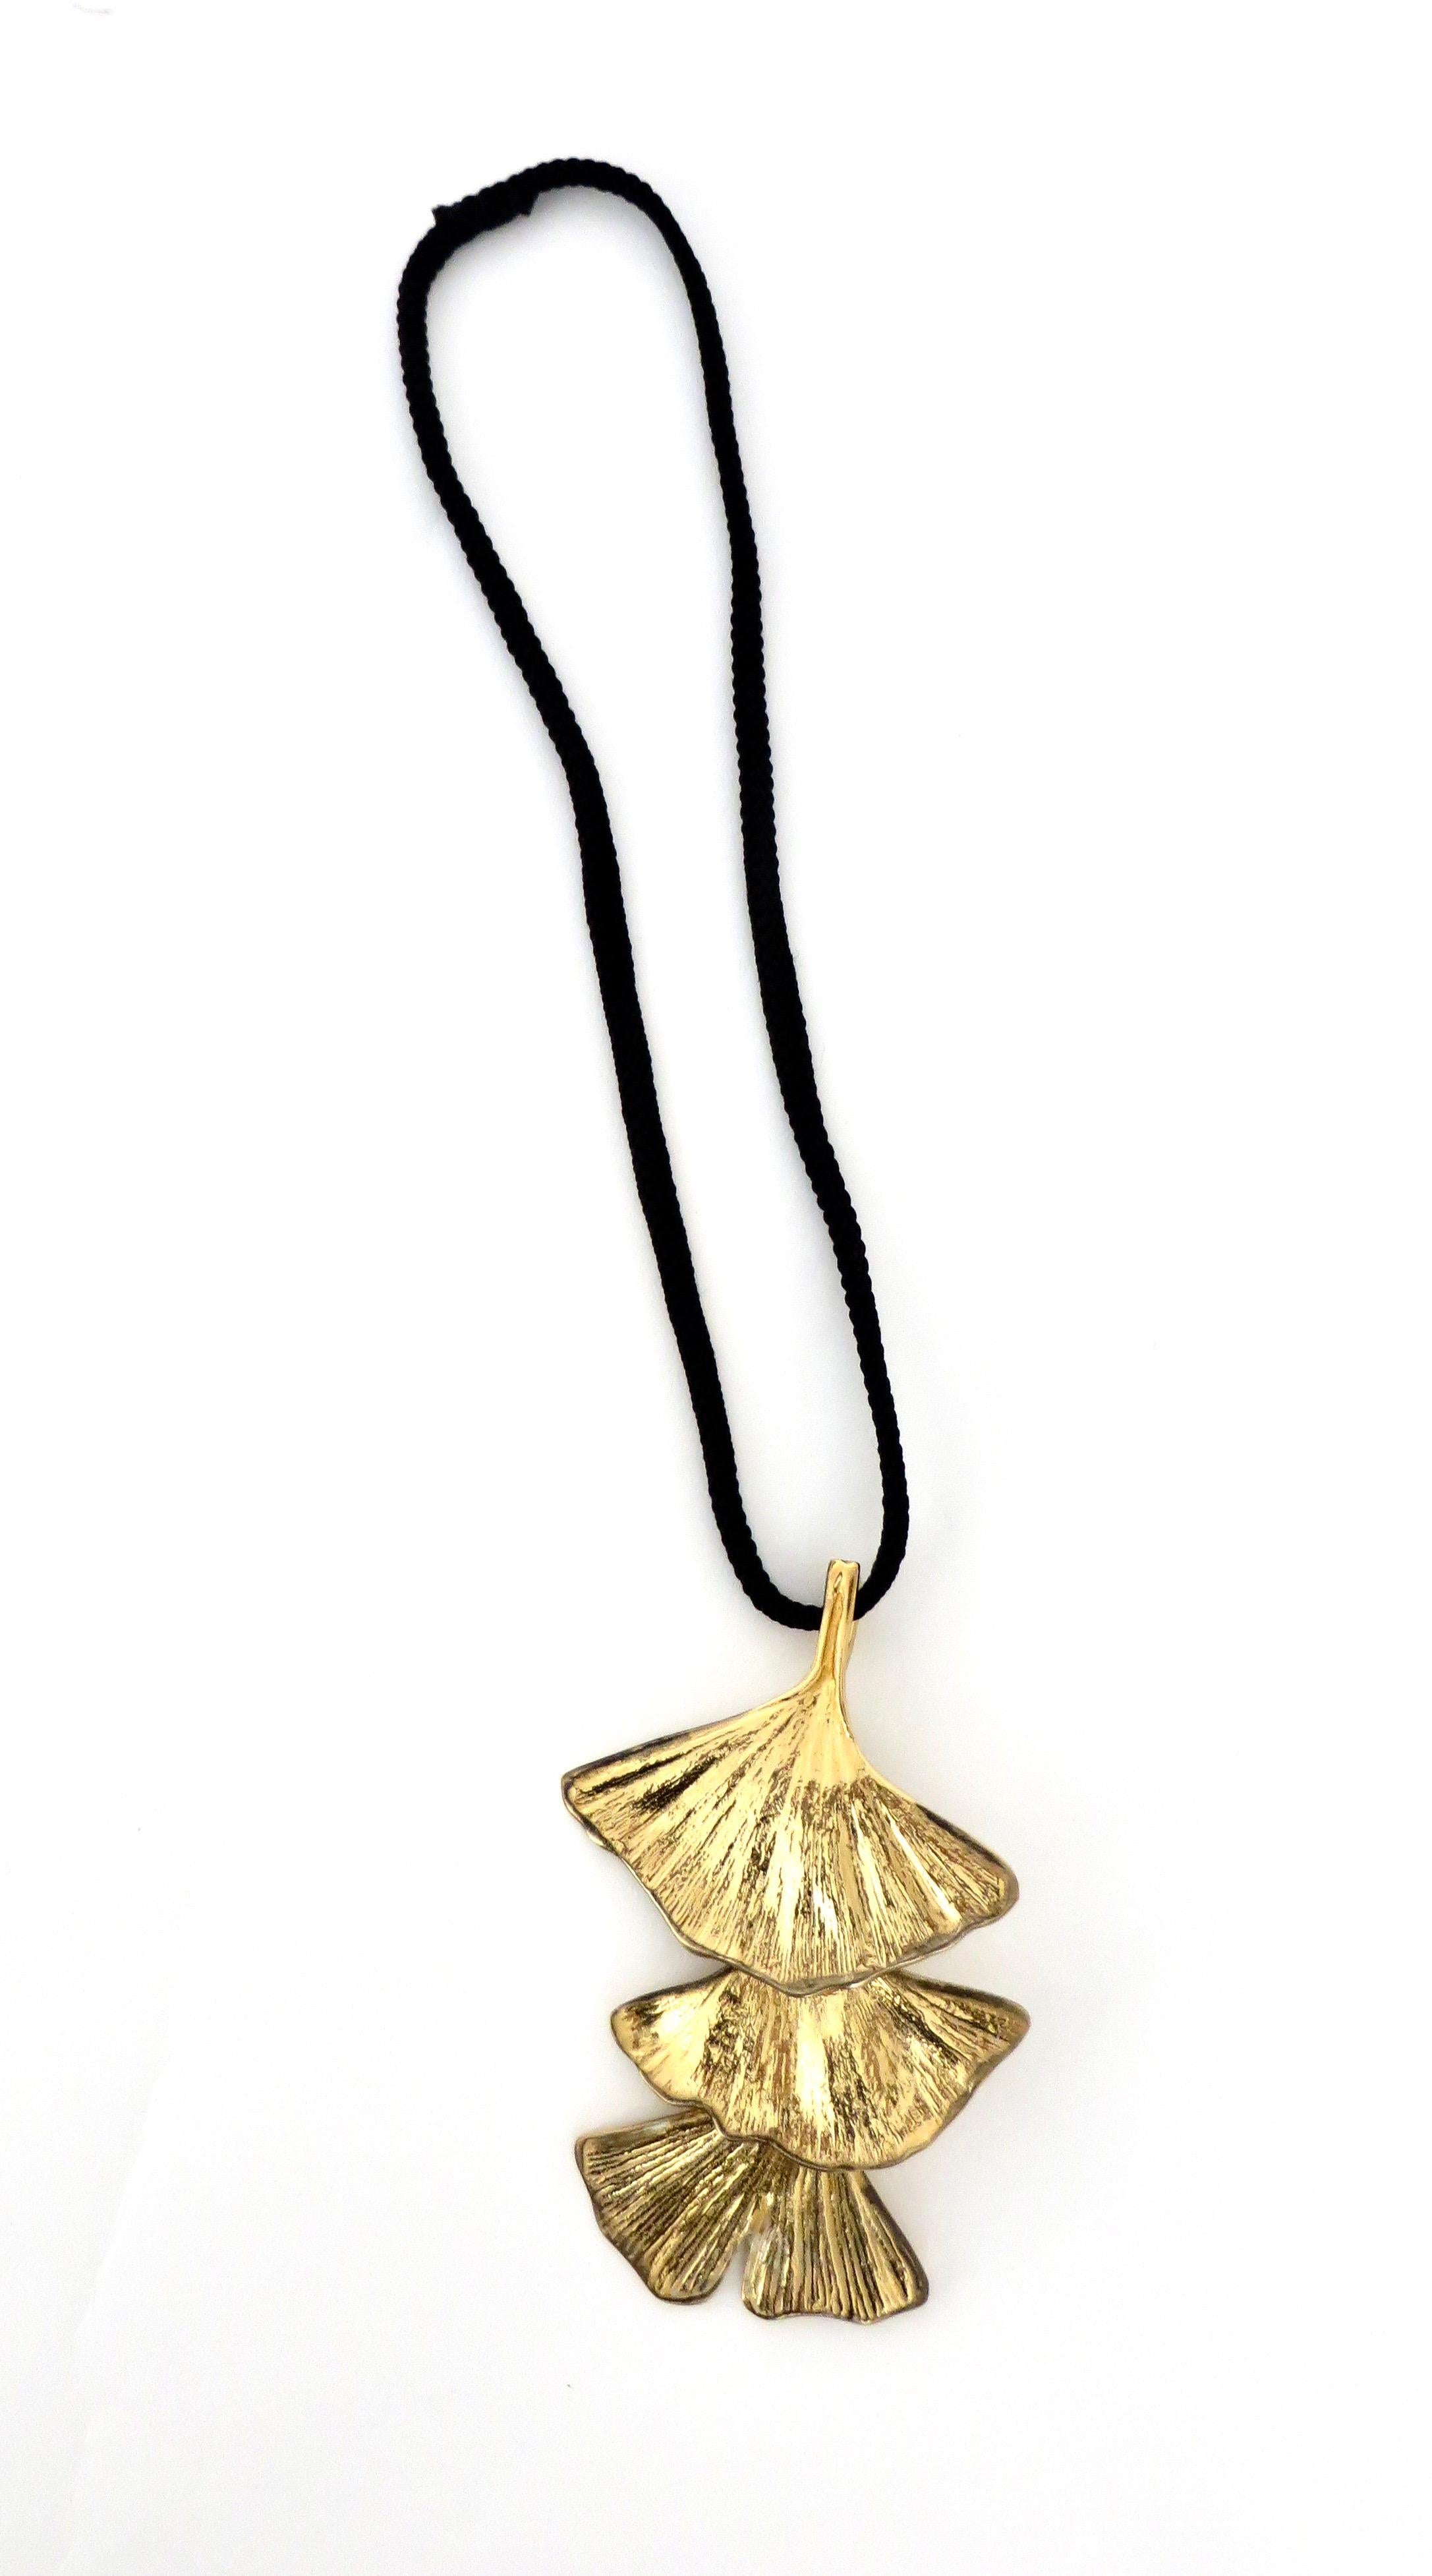 Paul Oudet signed for Claude de Muzac gilded bronze handmade Ginko necklace.
Paul Oudet created rare jewelry and objects for the Galerie Grotte of Claude de Muzac, Paris, circa 1970.
Each Ginko leave is handmade and has a movement making it almost